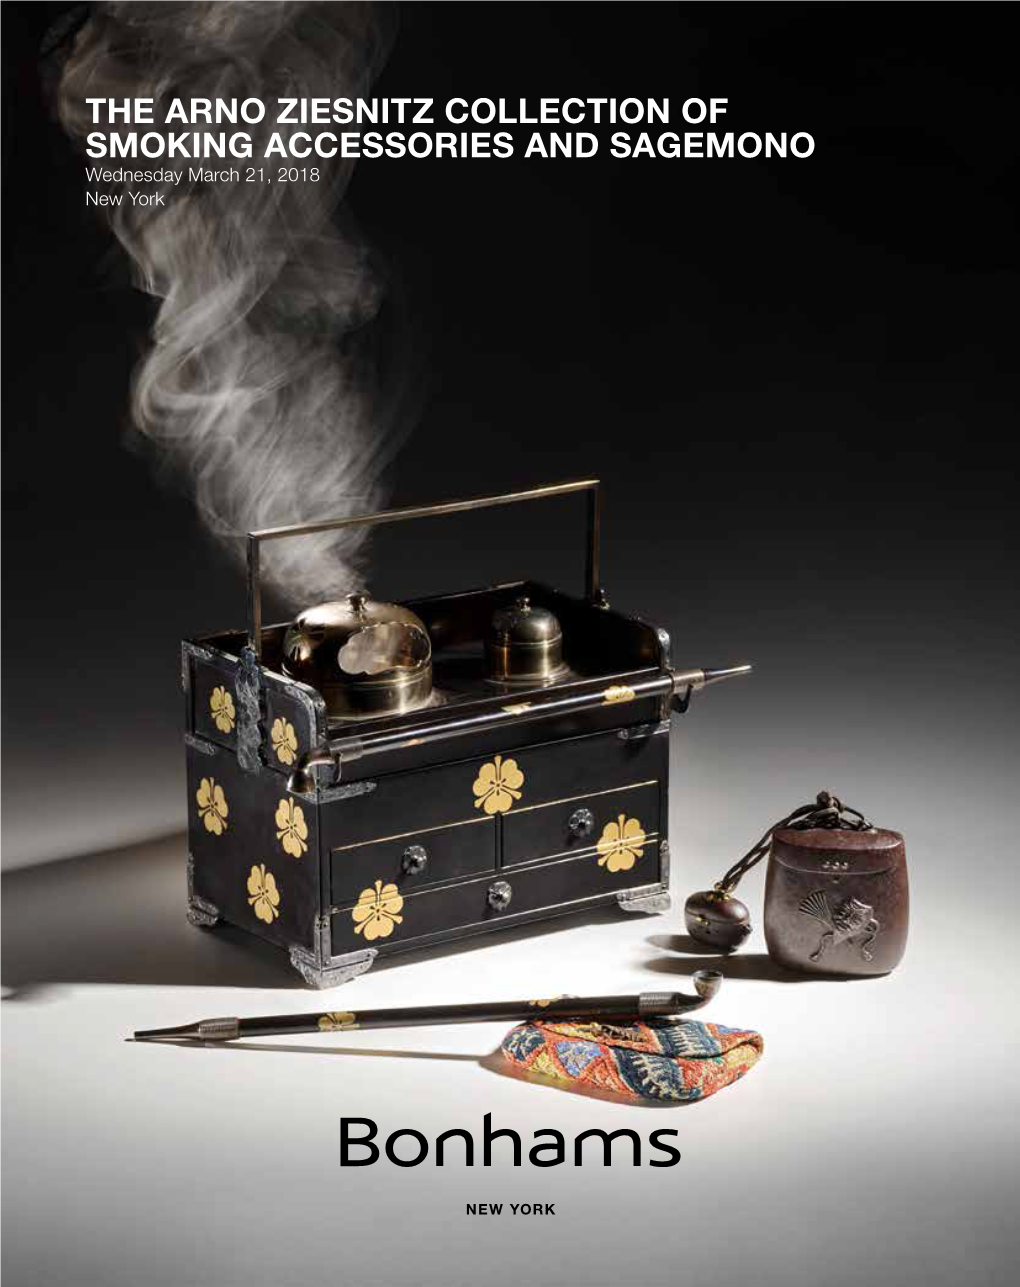 THE ARNO ZIESNITZ COLLECTION of SMOKING ACCESSORIES and SAGEMONO Wednesday March 21, 2018 New York